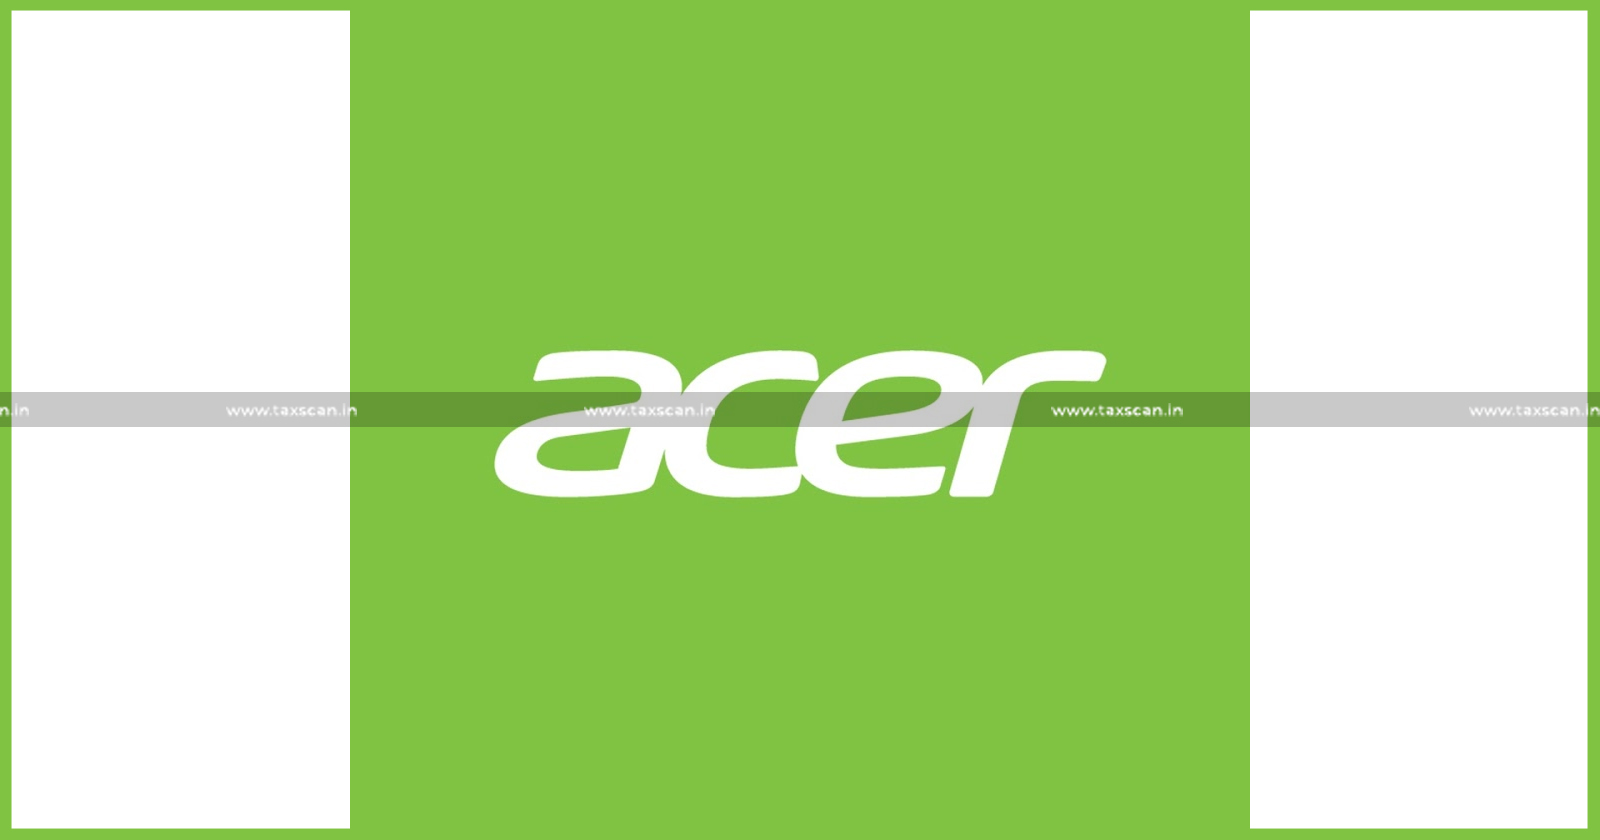 Acer India - Customs exemption - CESTAT Chennai - Video projector classification - taxscan